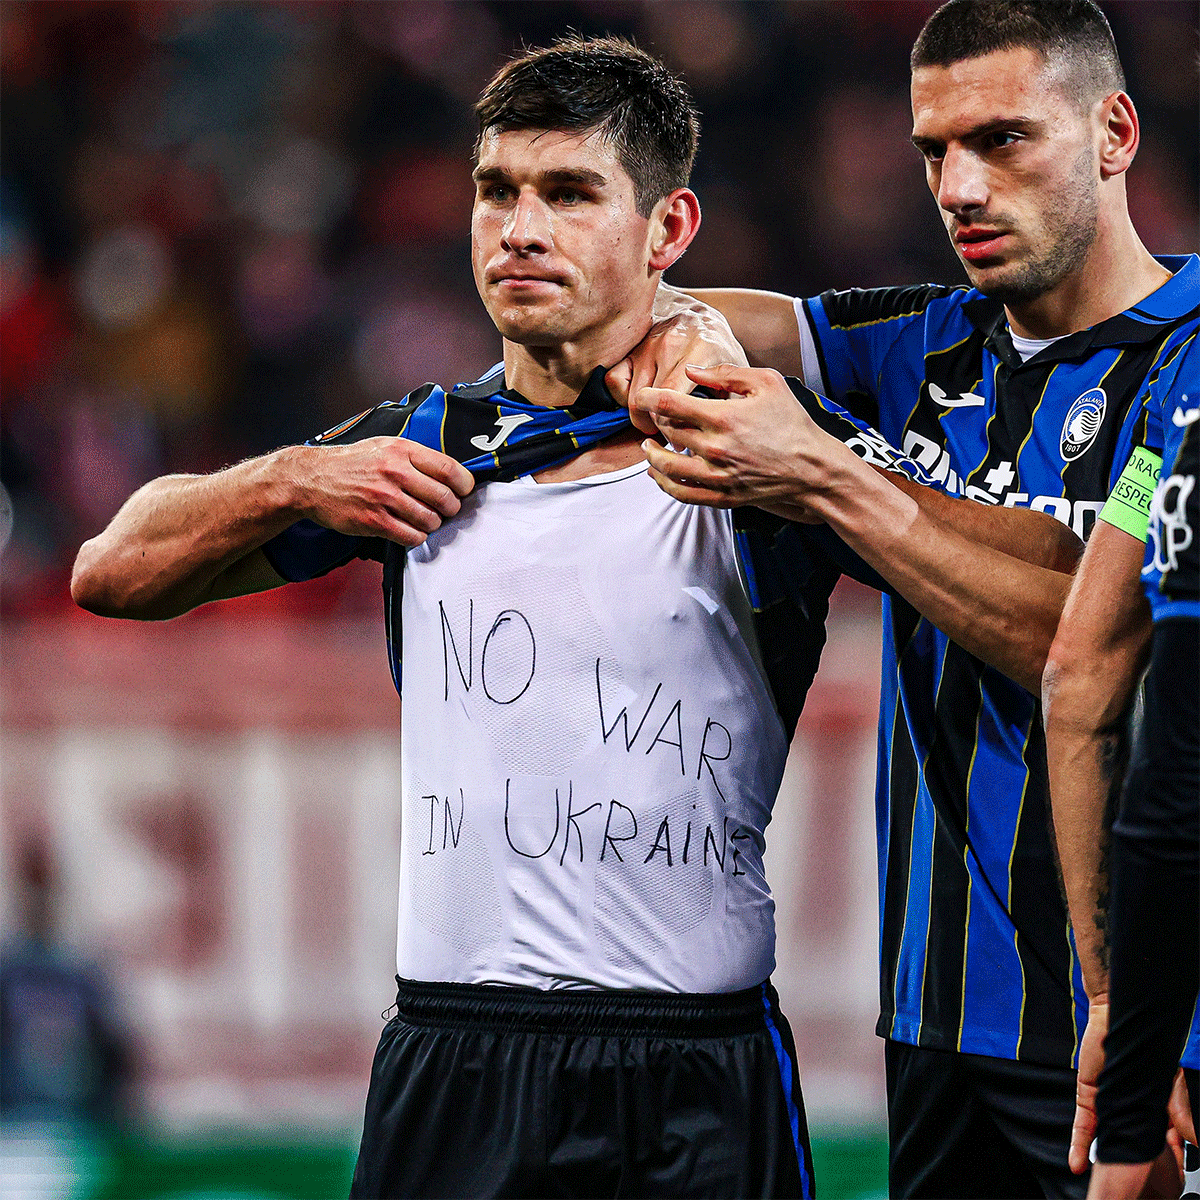 Atalanta's Ukranian winger Ruslan Malinovskyi who scored two goals against Olympiacos in their Europa Champions League match on Thursday, shows his shirt that says 'No war in Ukraine'.